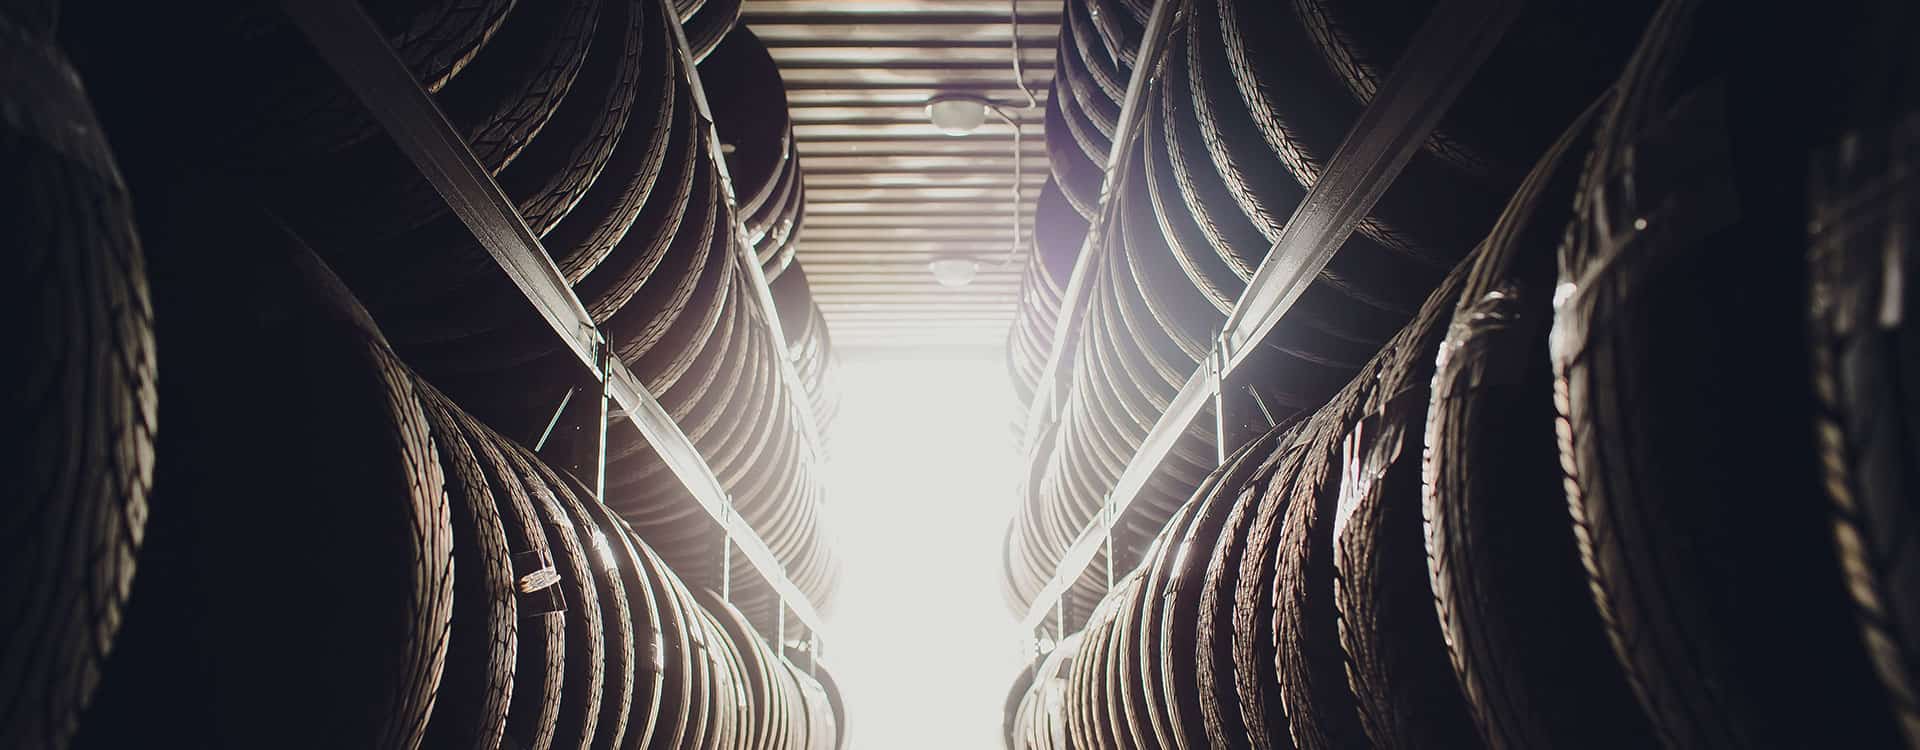 Give Tire Sales More Presence on Your Website to Increase Revenues and Maximize Customer Loyalty